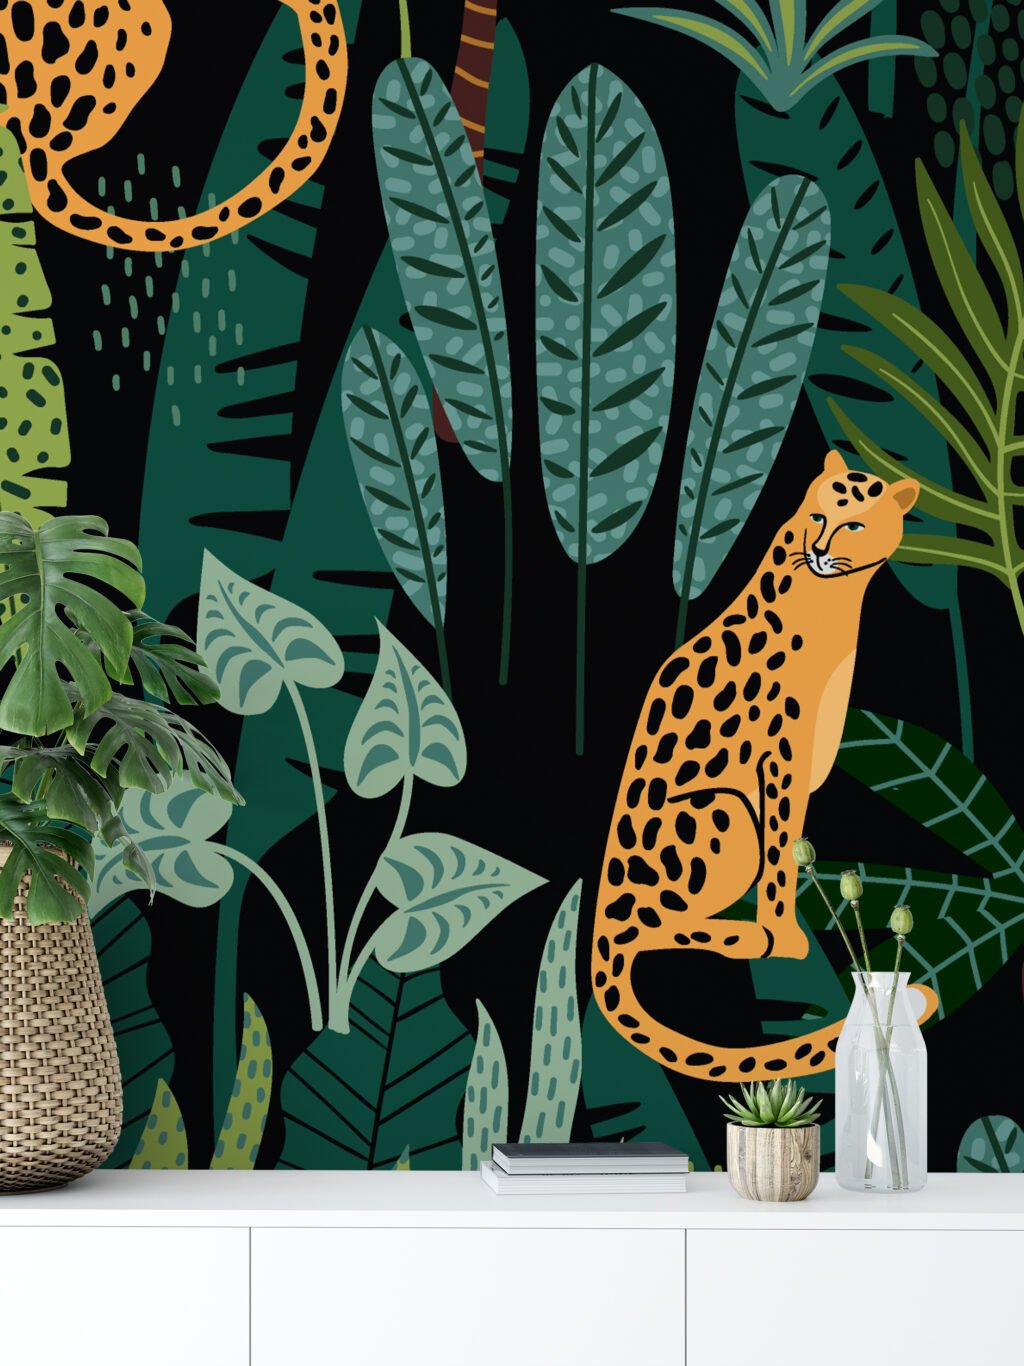 Green Tropical Flat Art Jungle With Leopards Illustrations Wallpaper, Exotic Jungle Inspired Peel & Stick Wall Mural